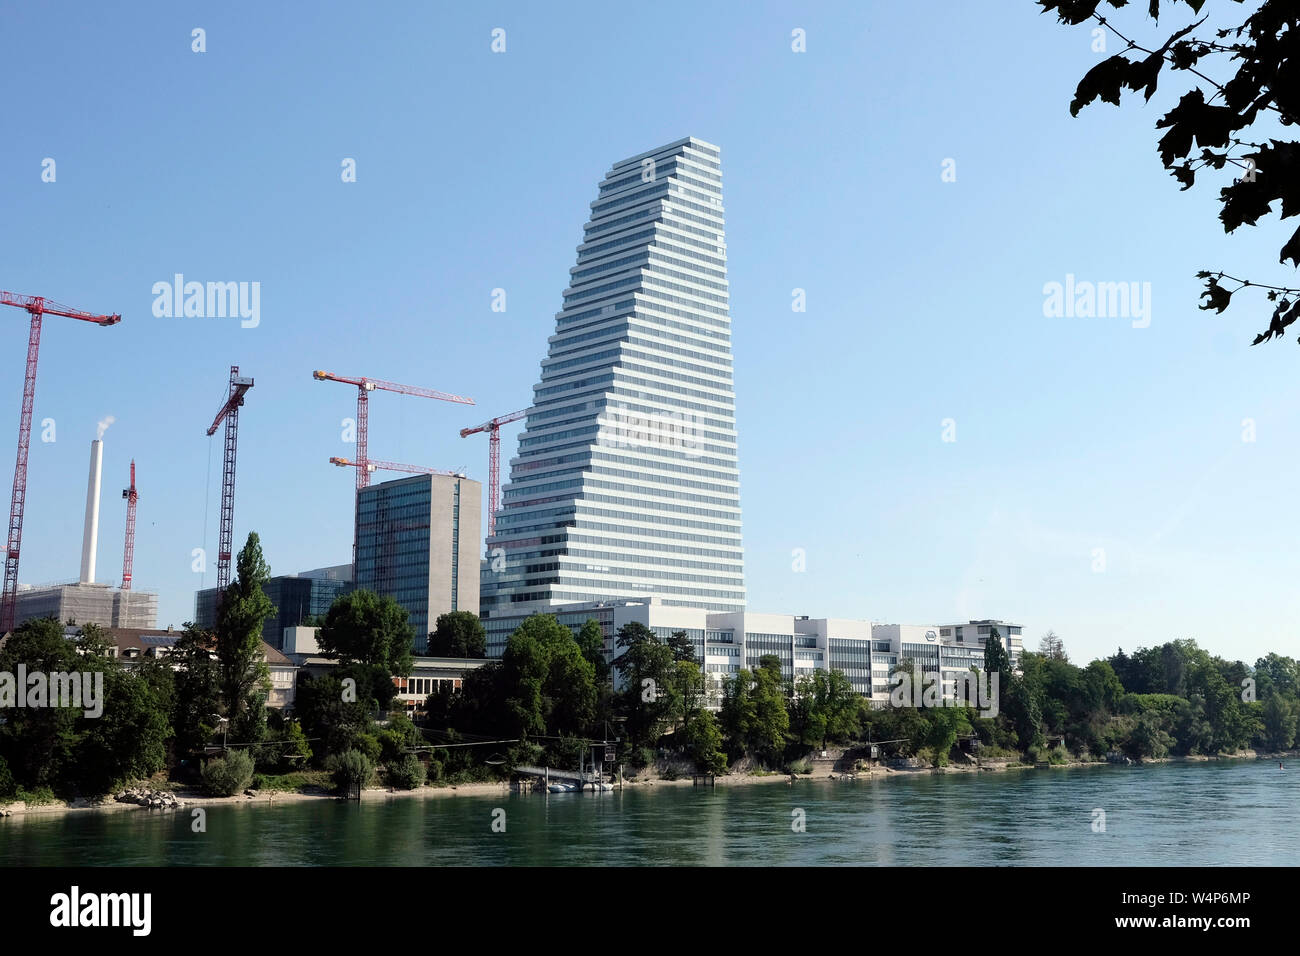 A view of Roche tower, a skyscaper in Basel and the tallest building in Switzerland Stock Photo